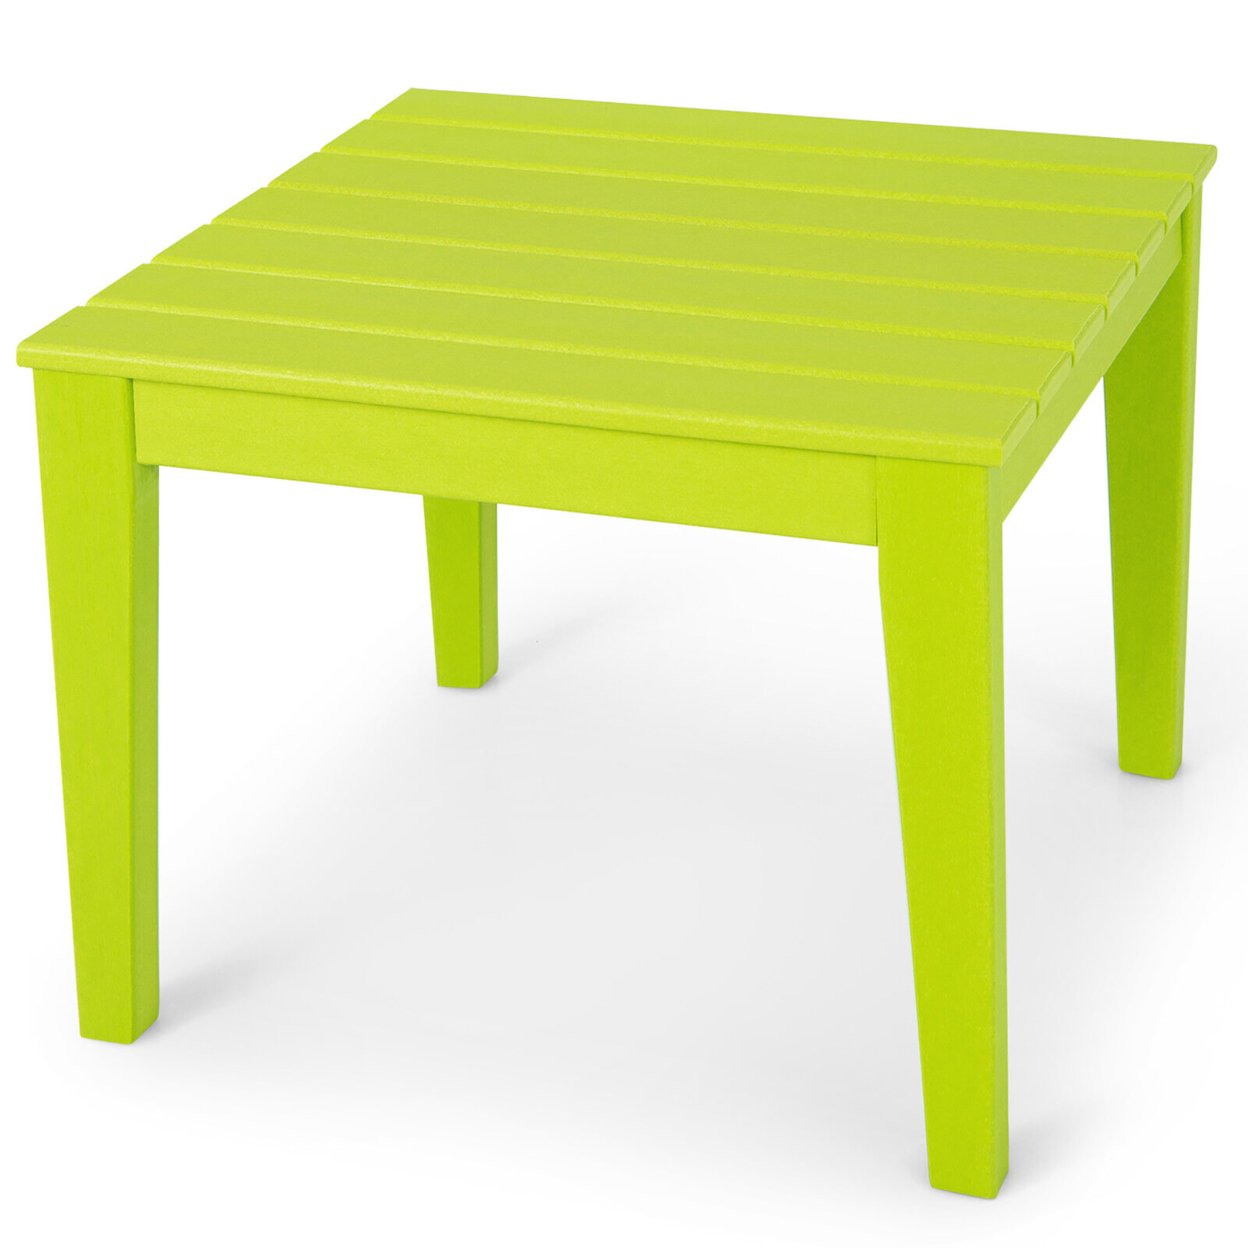 Kids Square Table Indoor Outdoor Heavy-Duty All-Weather Activity Play Table - Green